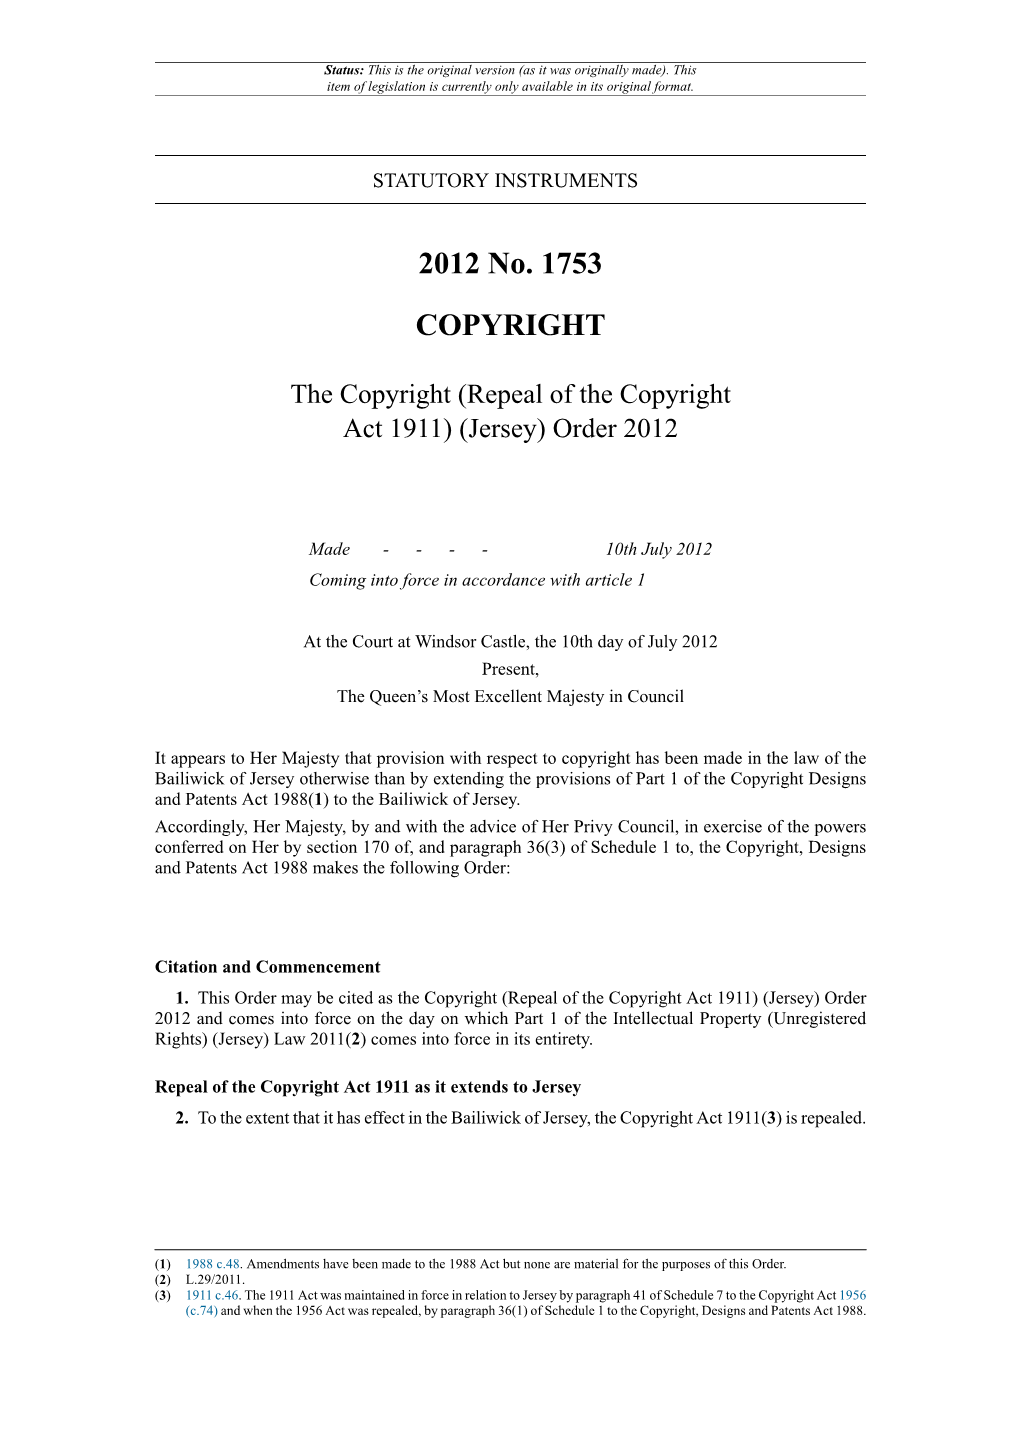 (Repeal of the Copyright Act 1911) (Jersey) Order 2012